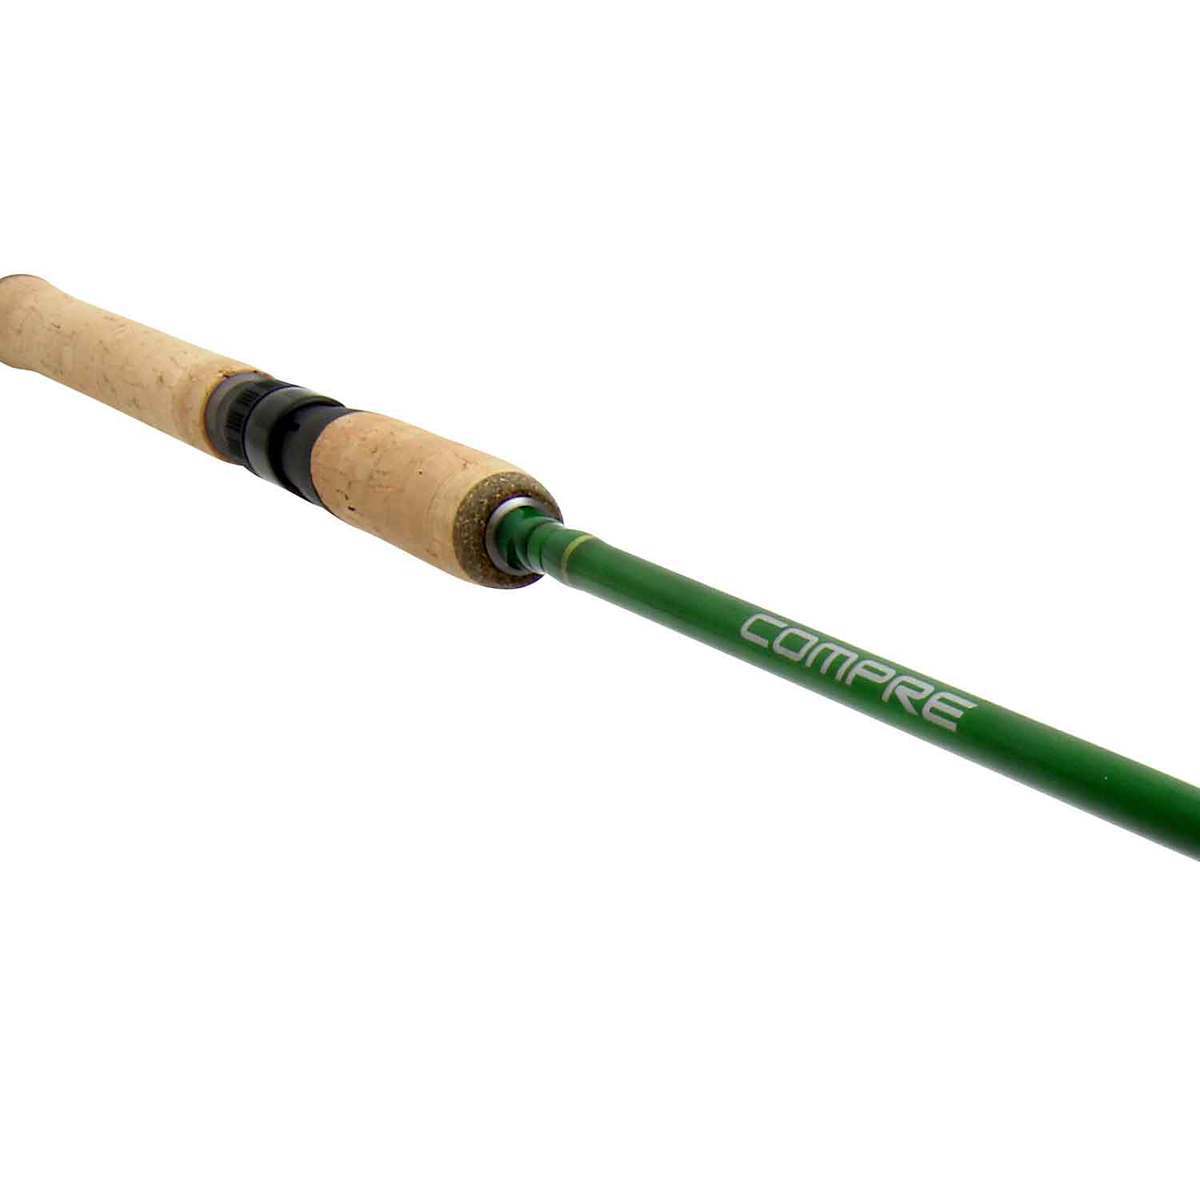 Shimano Compre Walleye Spinning Rod - CPSWX76MD